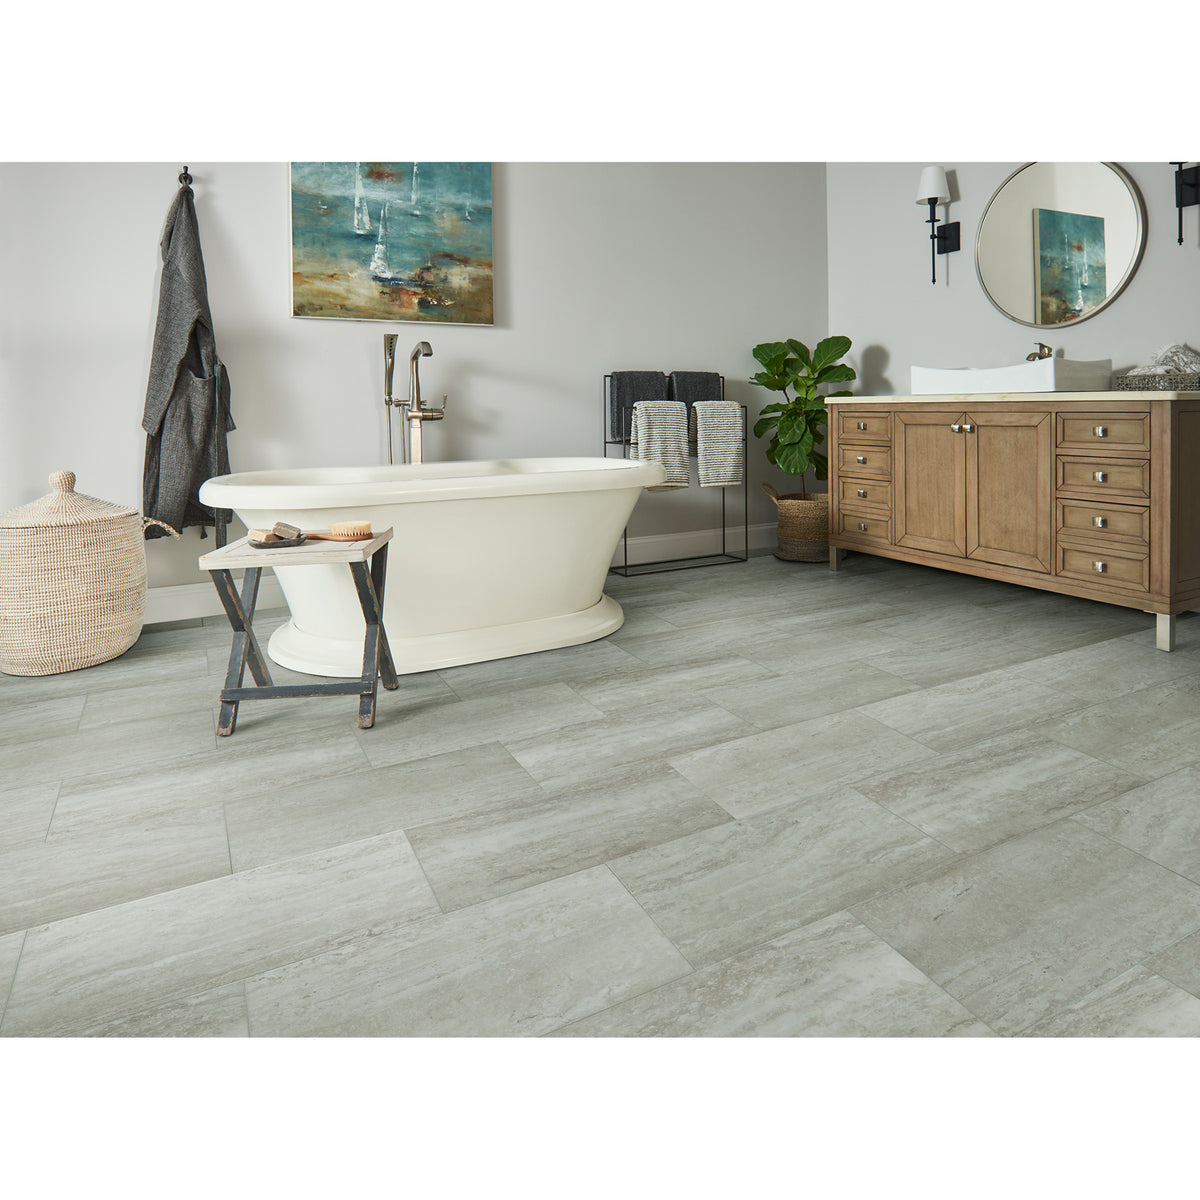 Bruce - Lifeseal Reserve Rigid Core - 12 in. x 24 in. - Travertine Homestead Installed